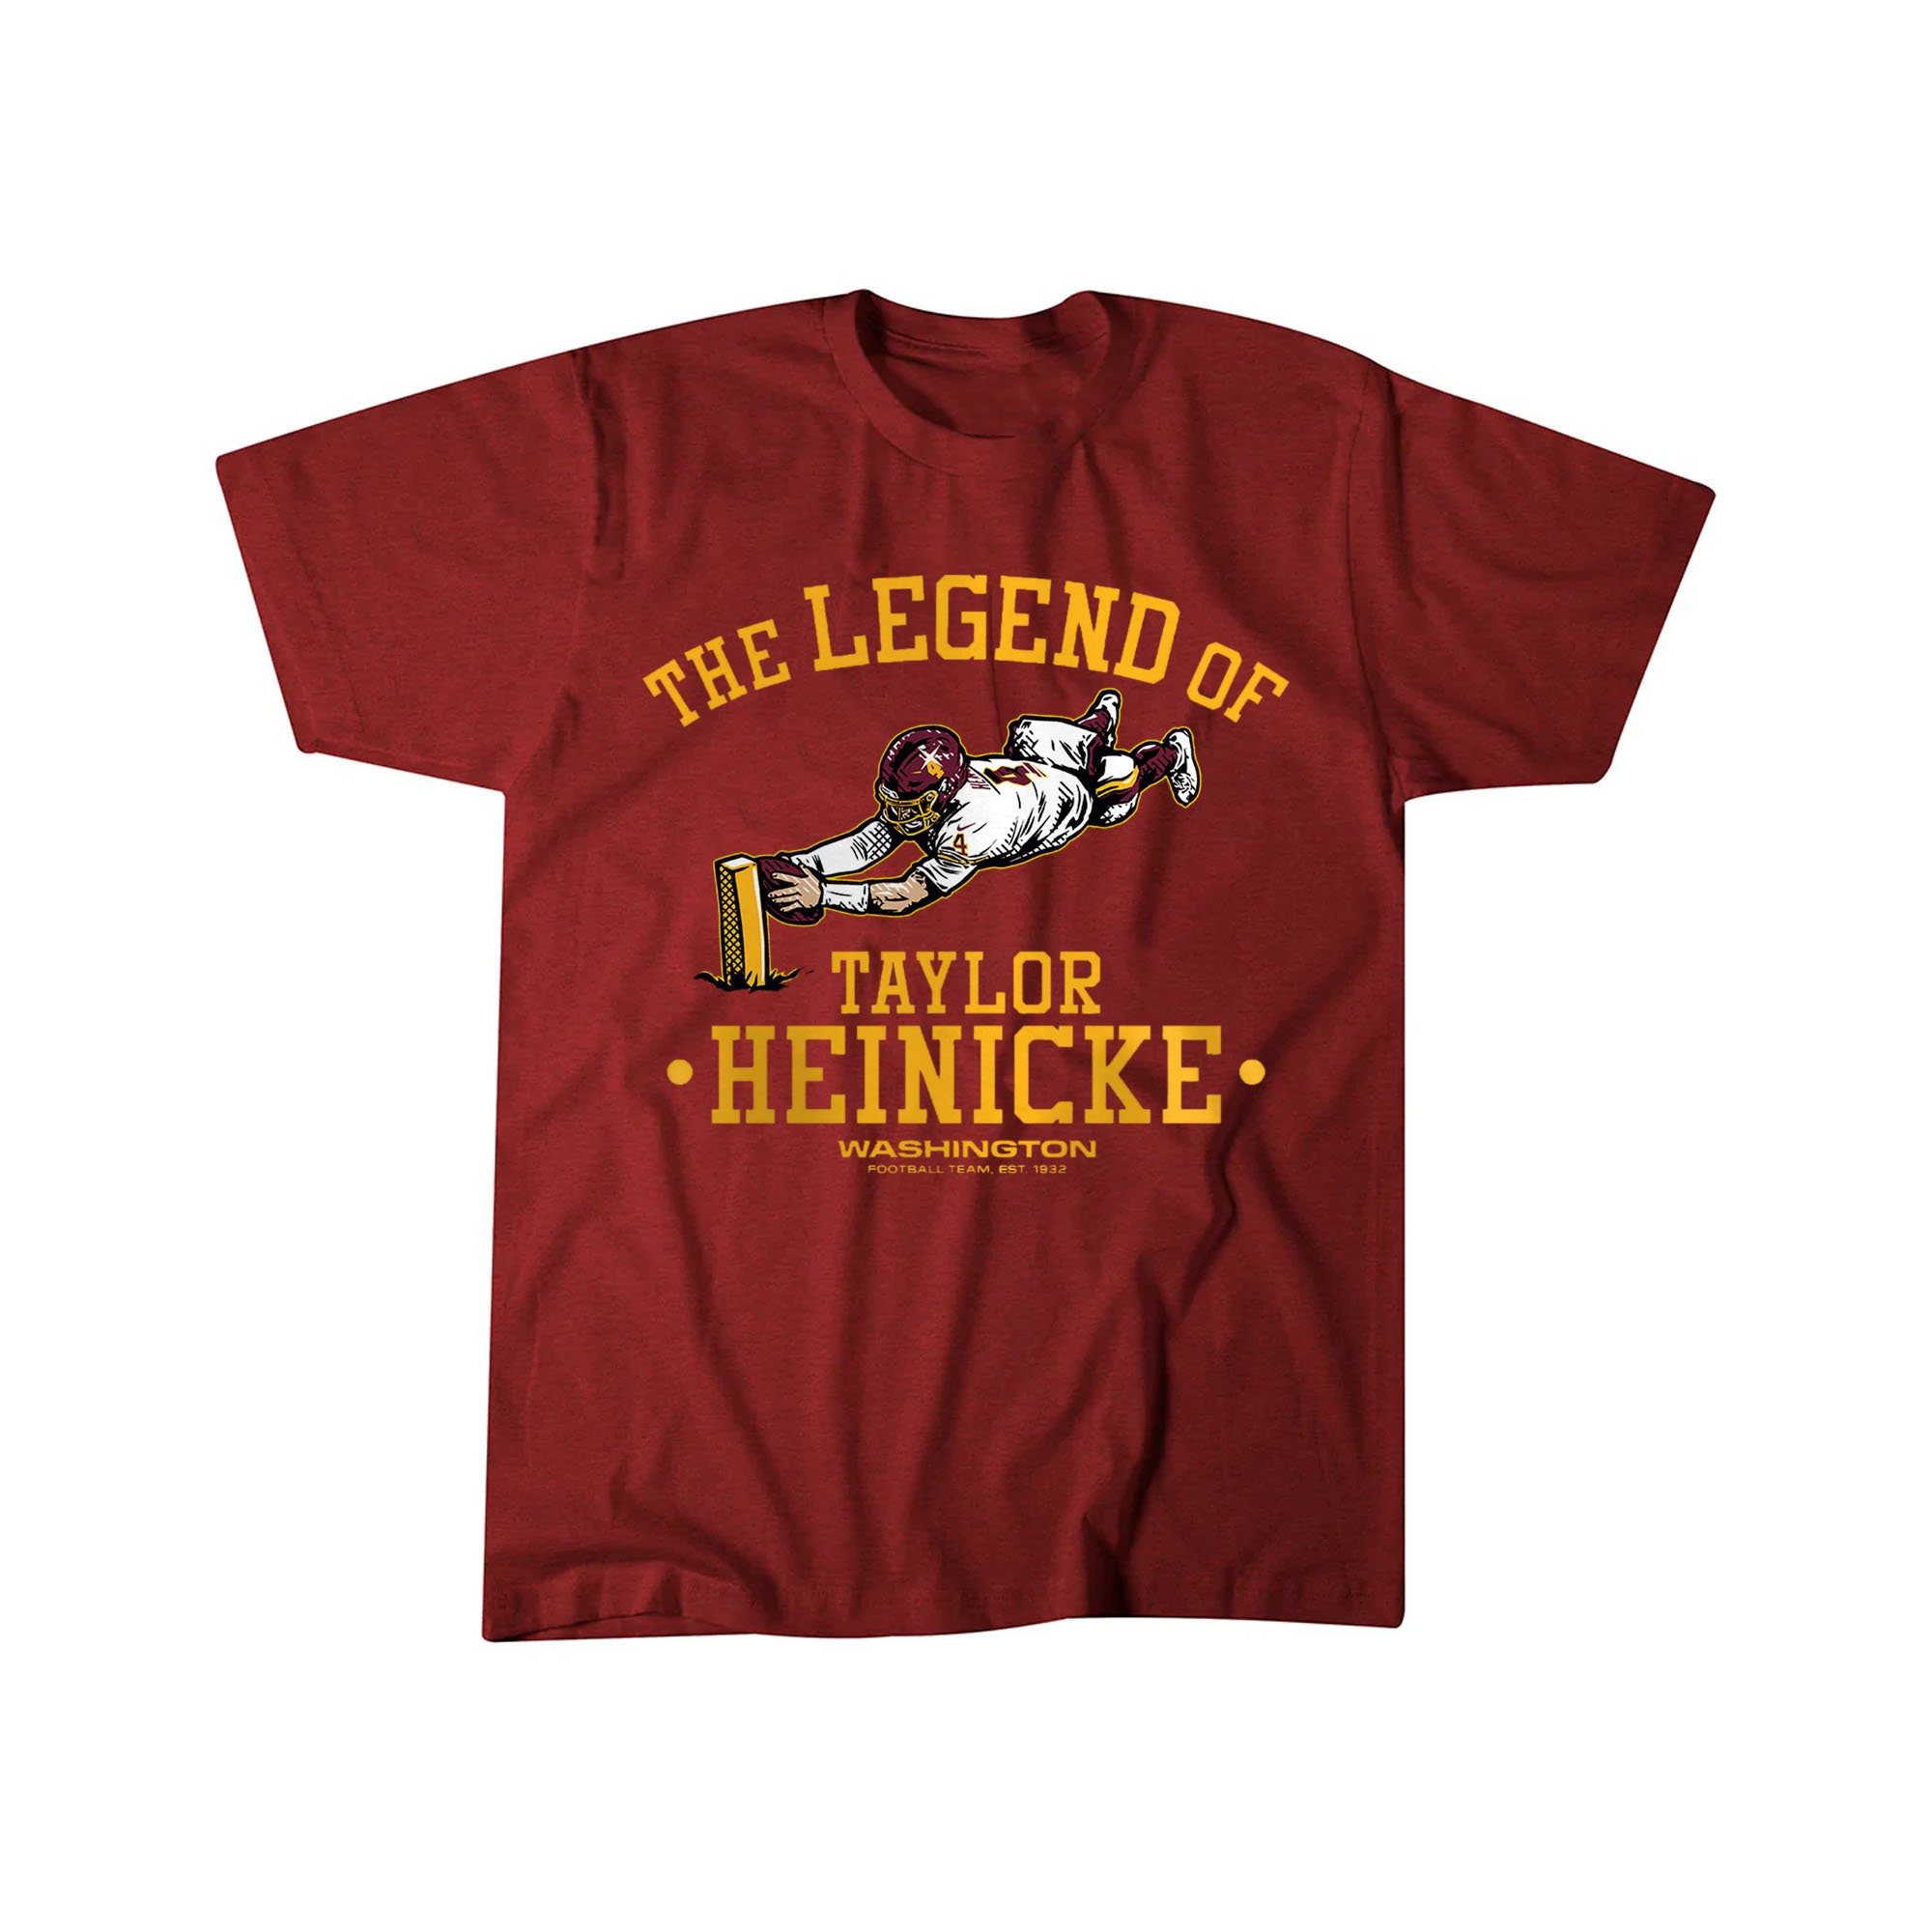 Discover Taylor Heinicke Shirt, The Legend of Taylor Heinicke T-Shirt